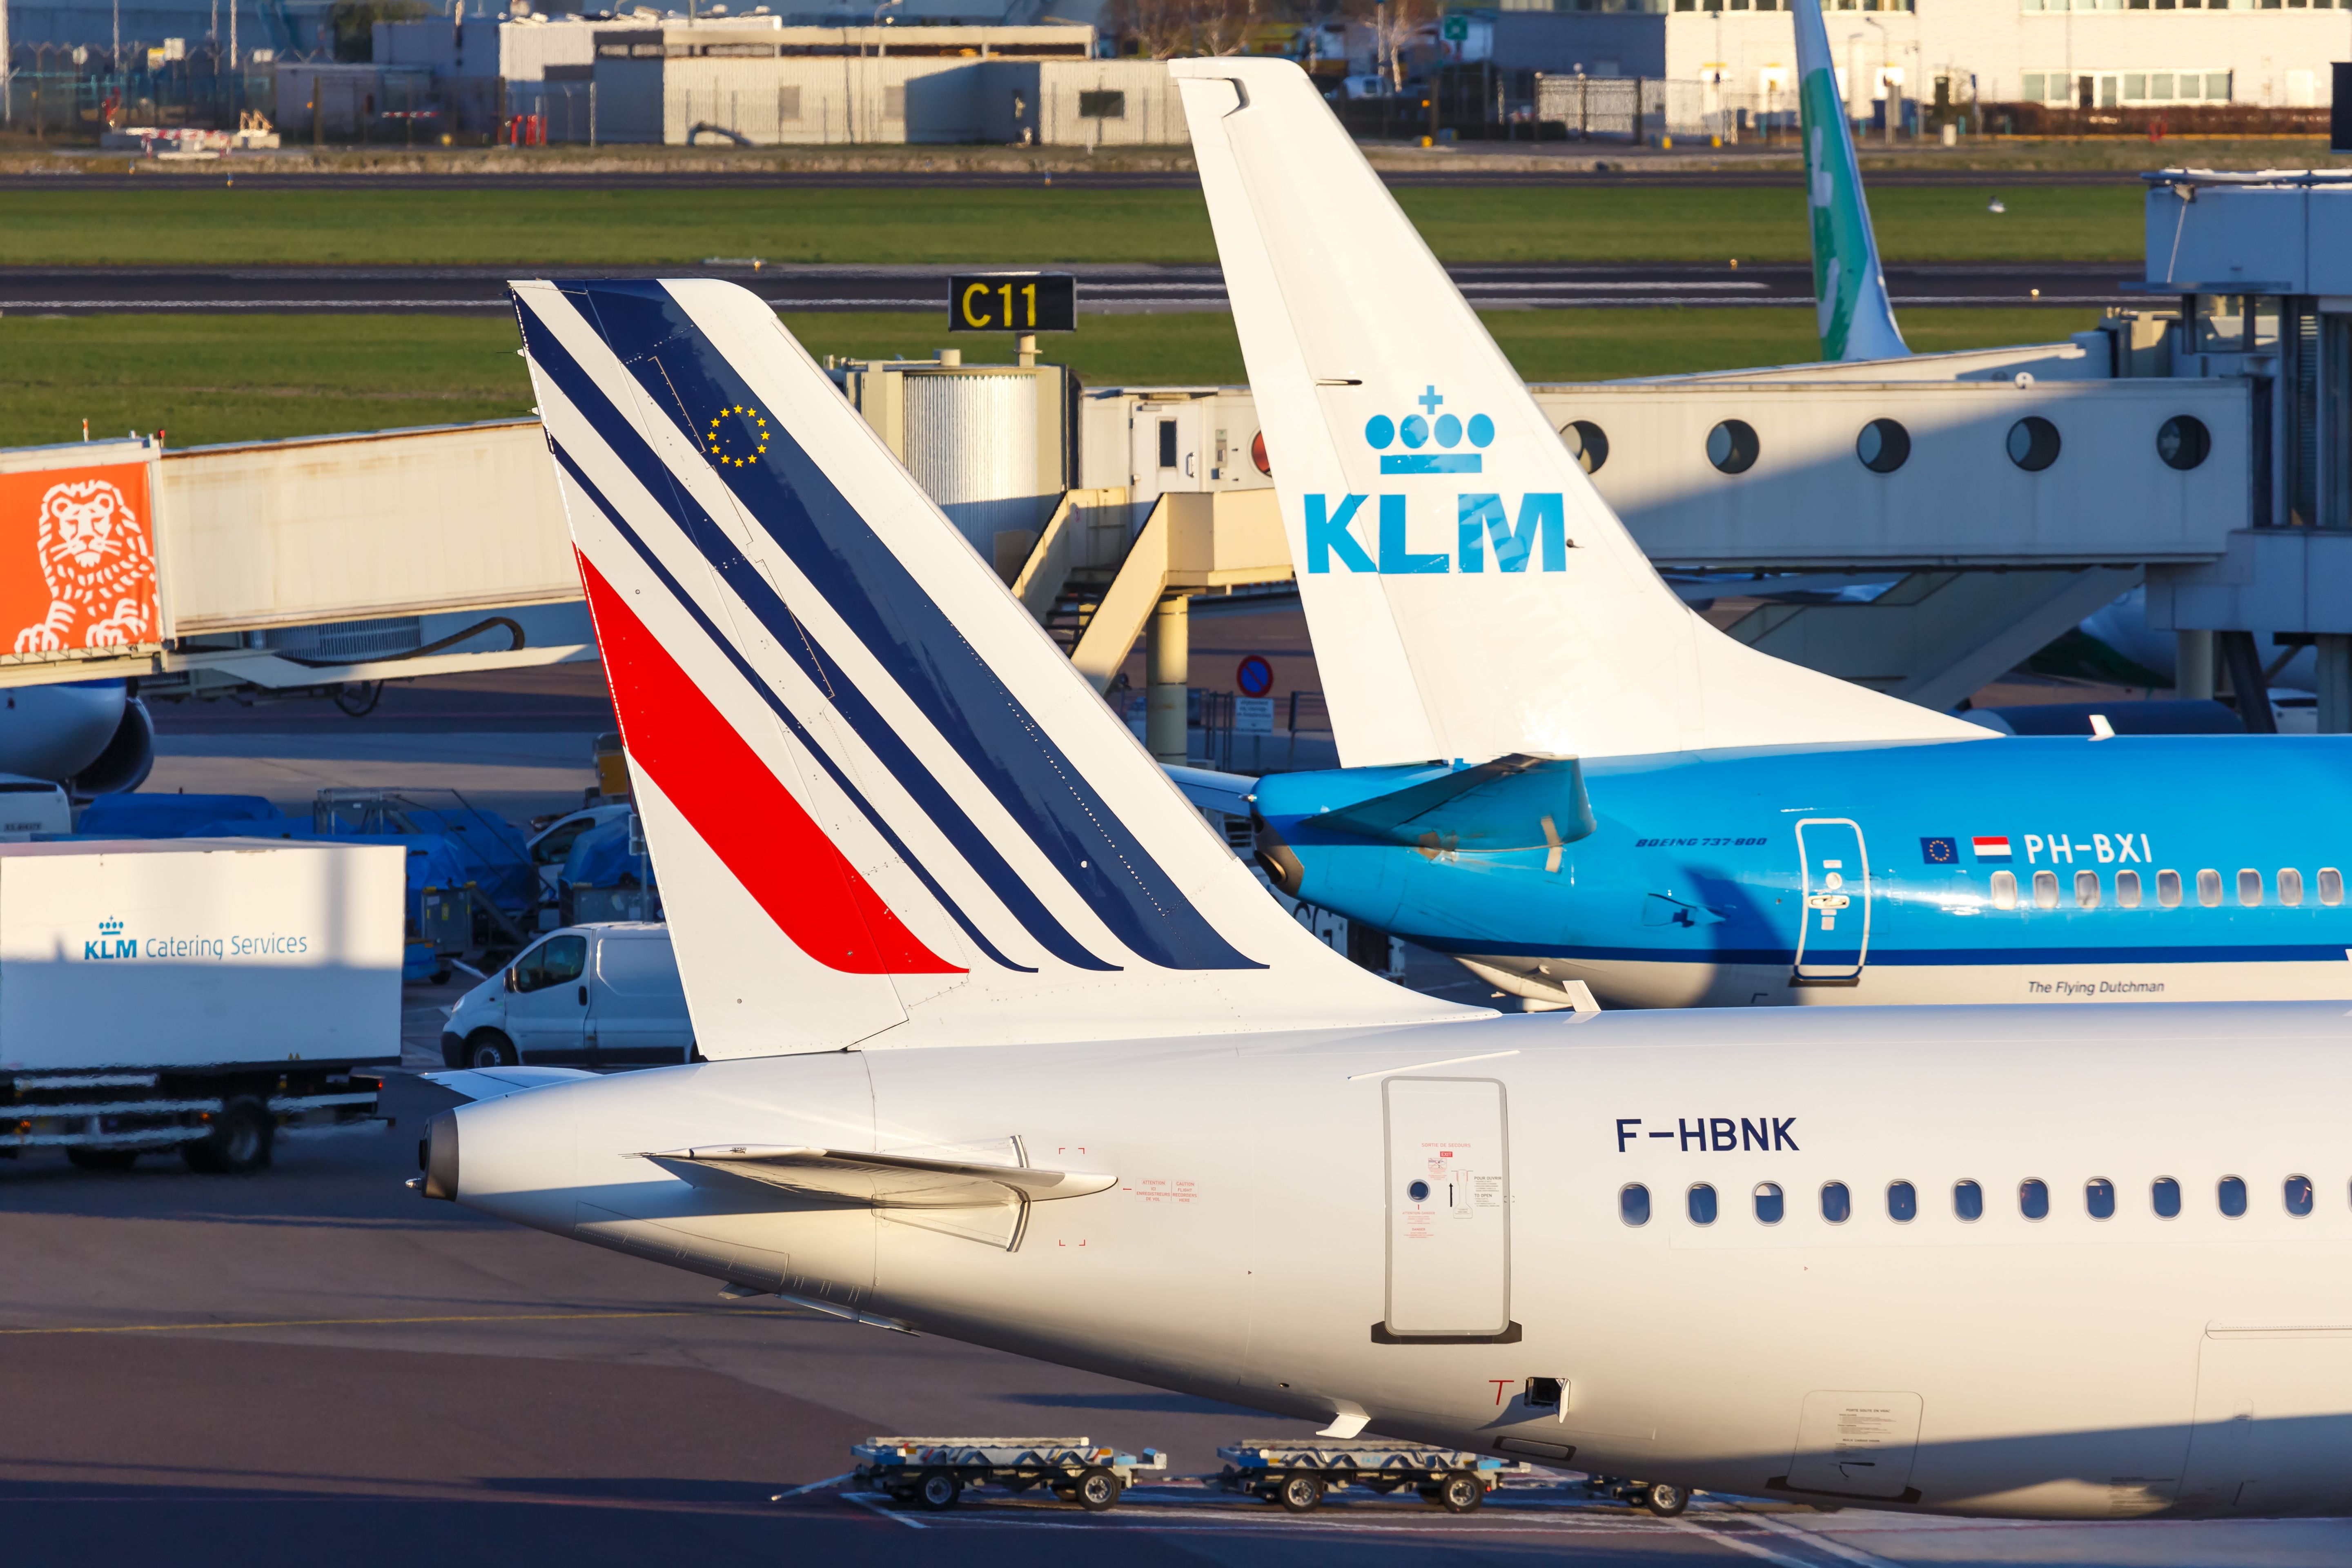 Air France and KLM aircraft at Amsterdam Schiphol Airport.